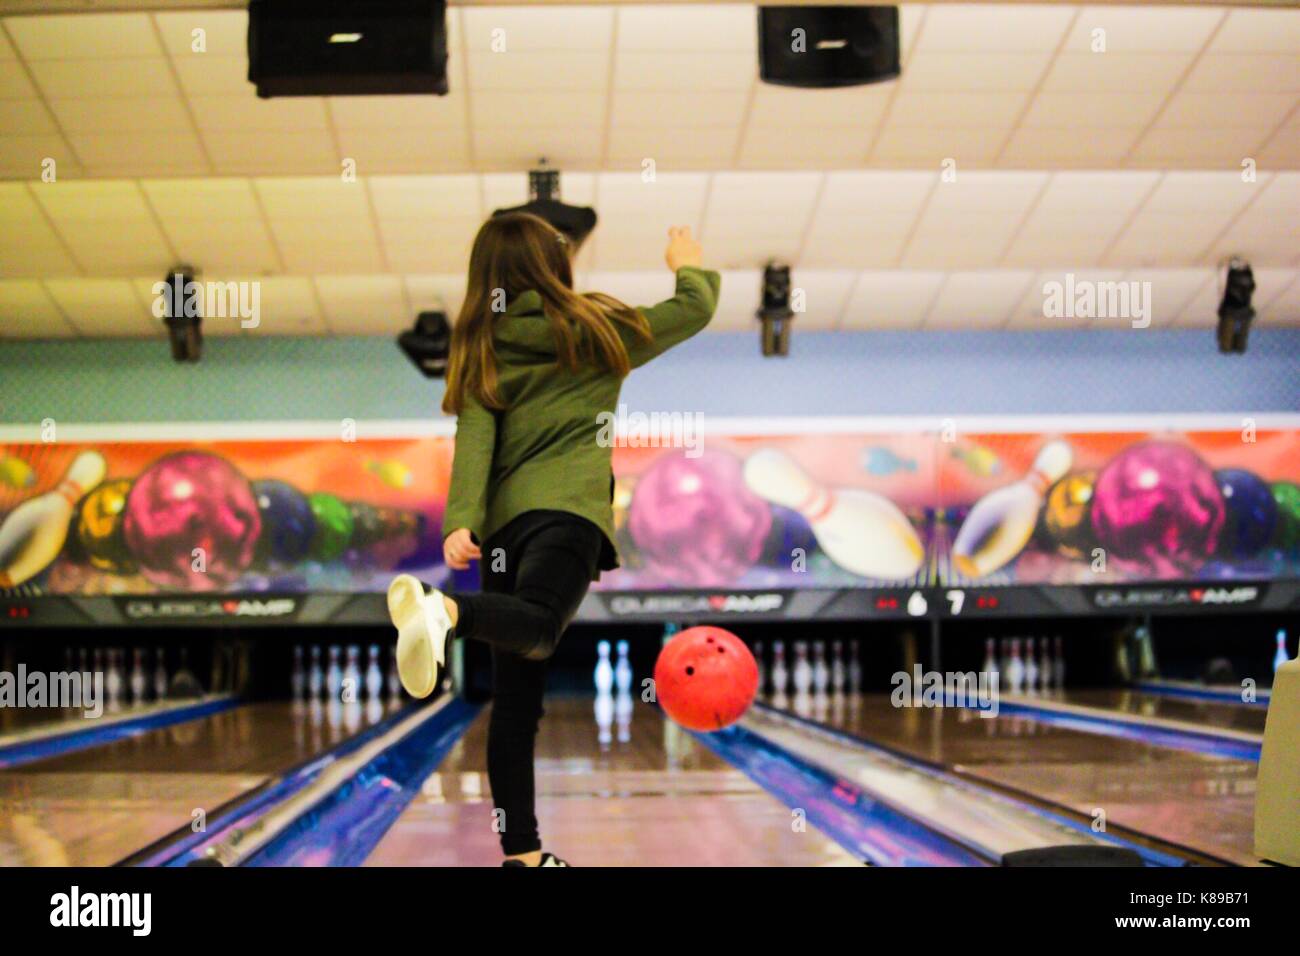 Candid Child Bowling Action Shot Stock Photo